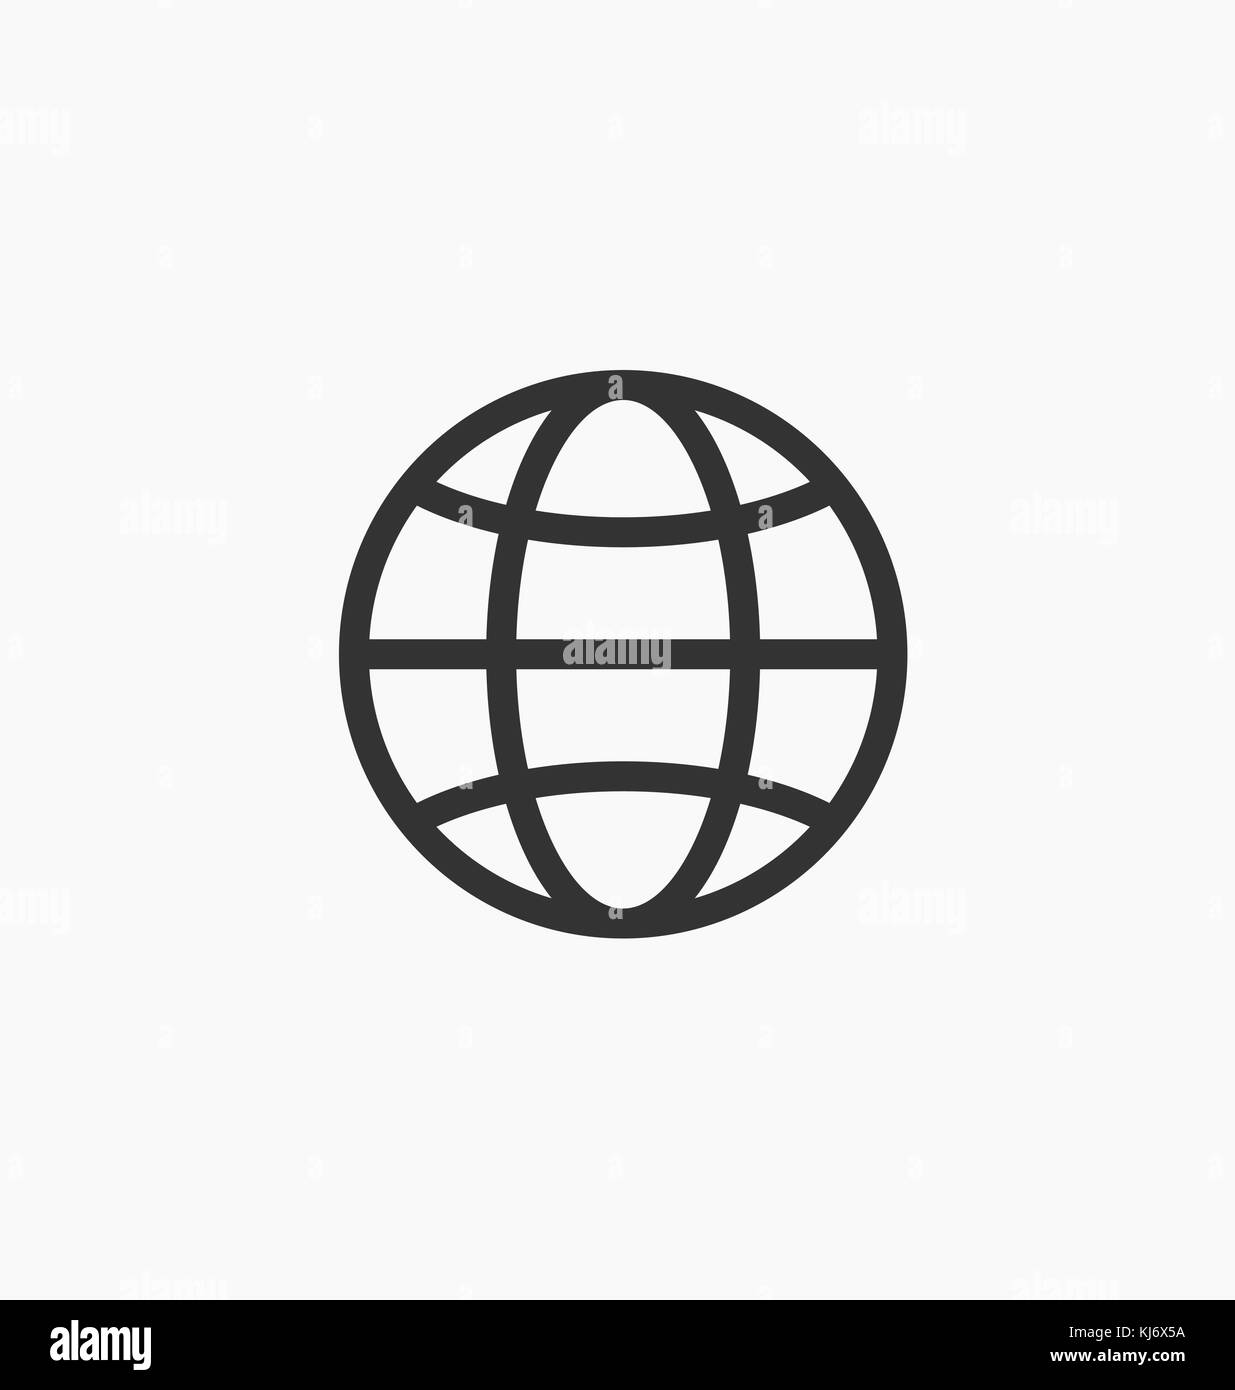 Earth icon / sign in flat style isolated. Earth globe symbol for your web site, logo, app, UI design. Vector illustration. Stock Vector